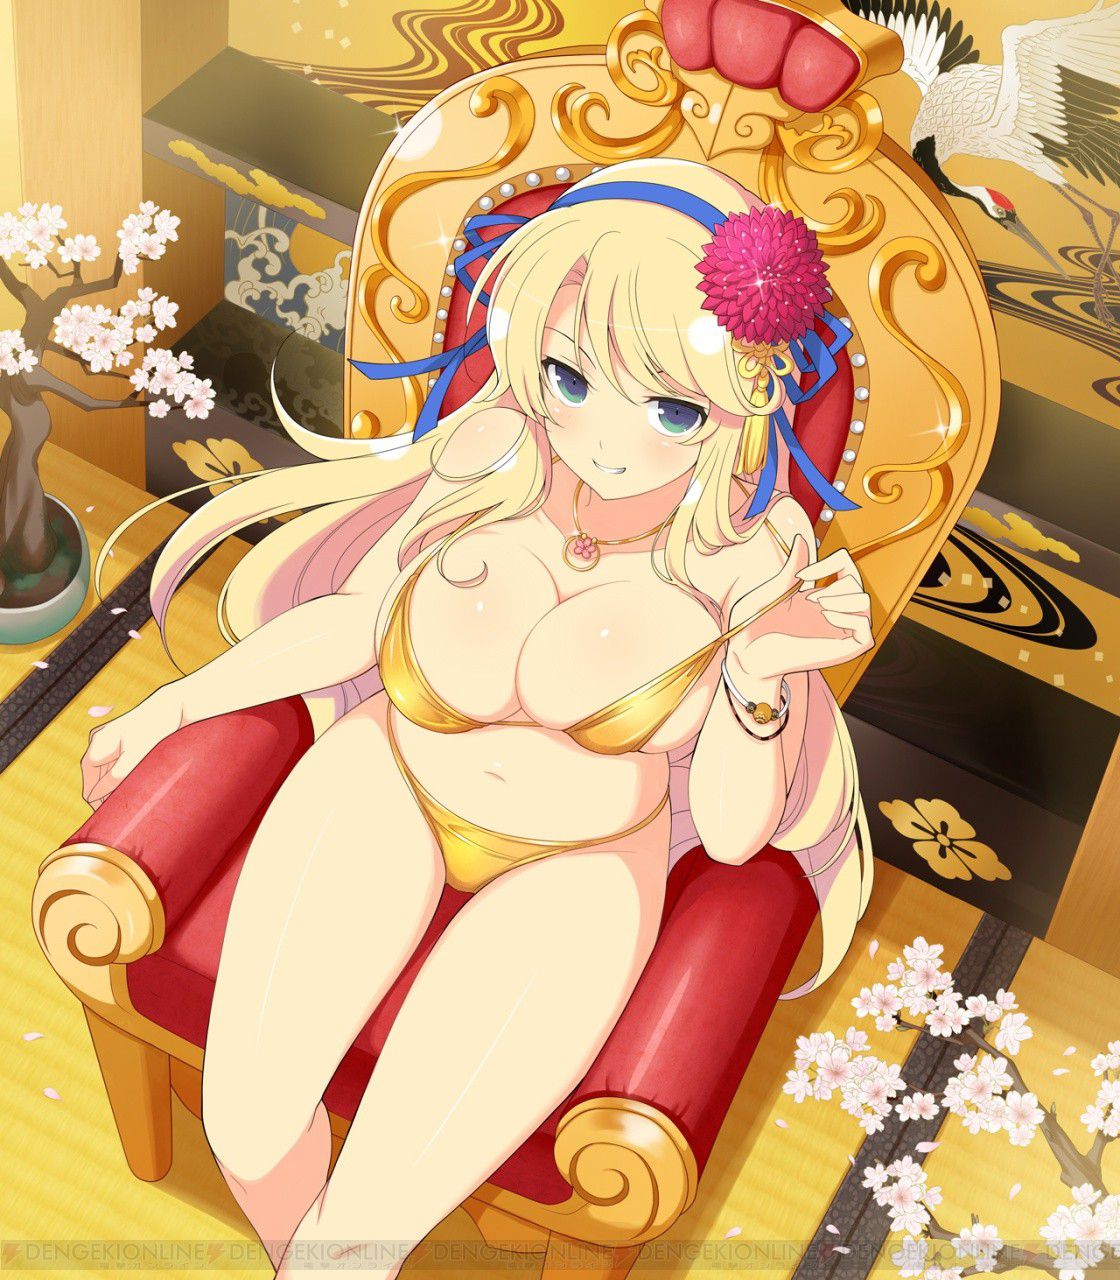 [Senran Kagura] [best PIE Championship] is held! Popular character vote is determined by the size of the breast! 21